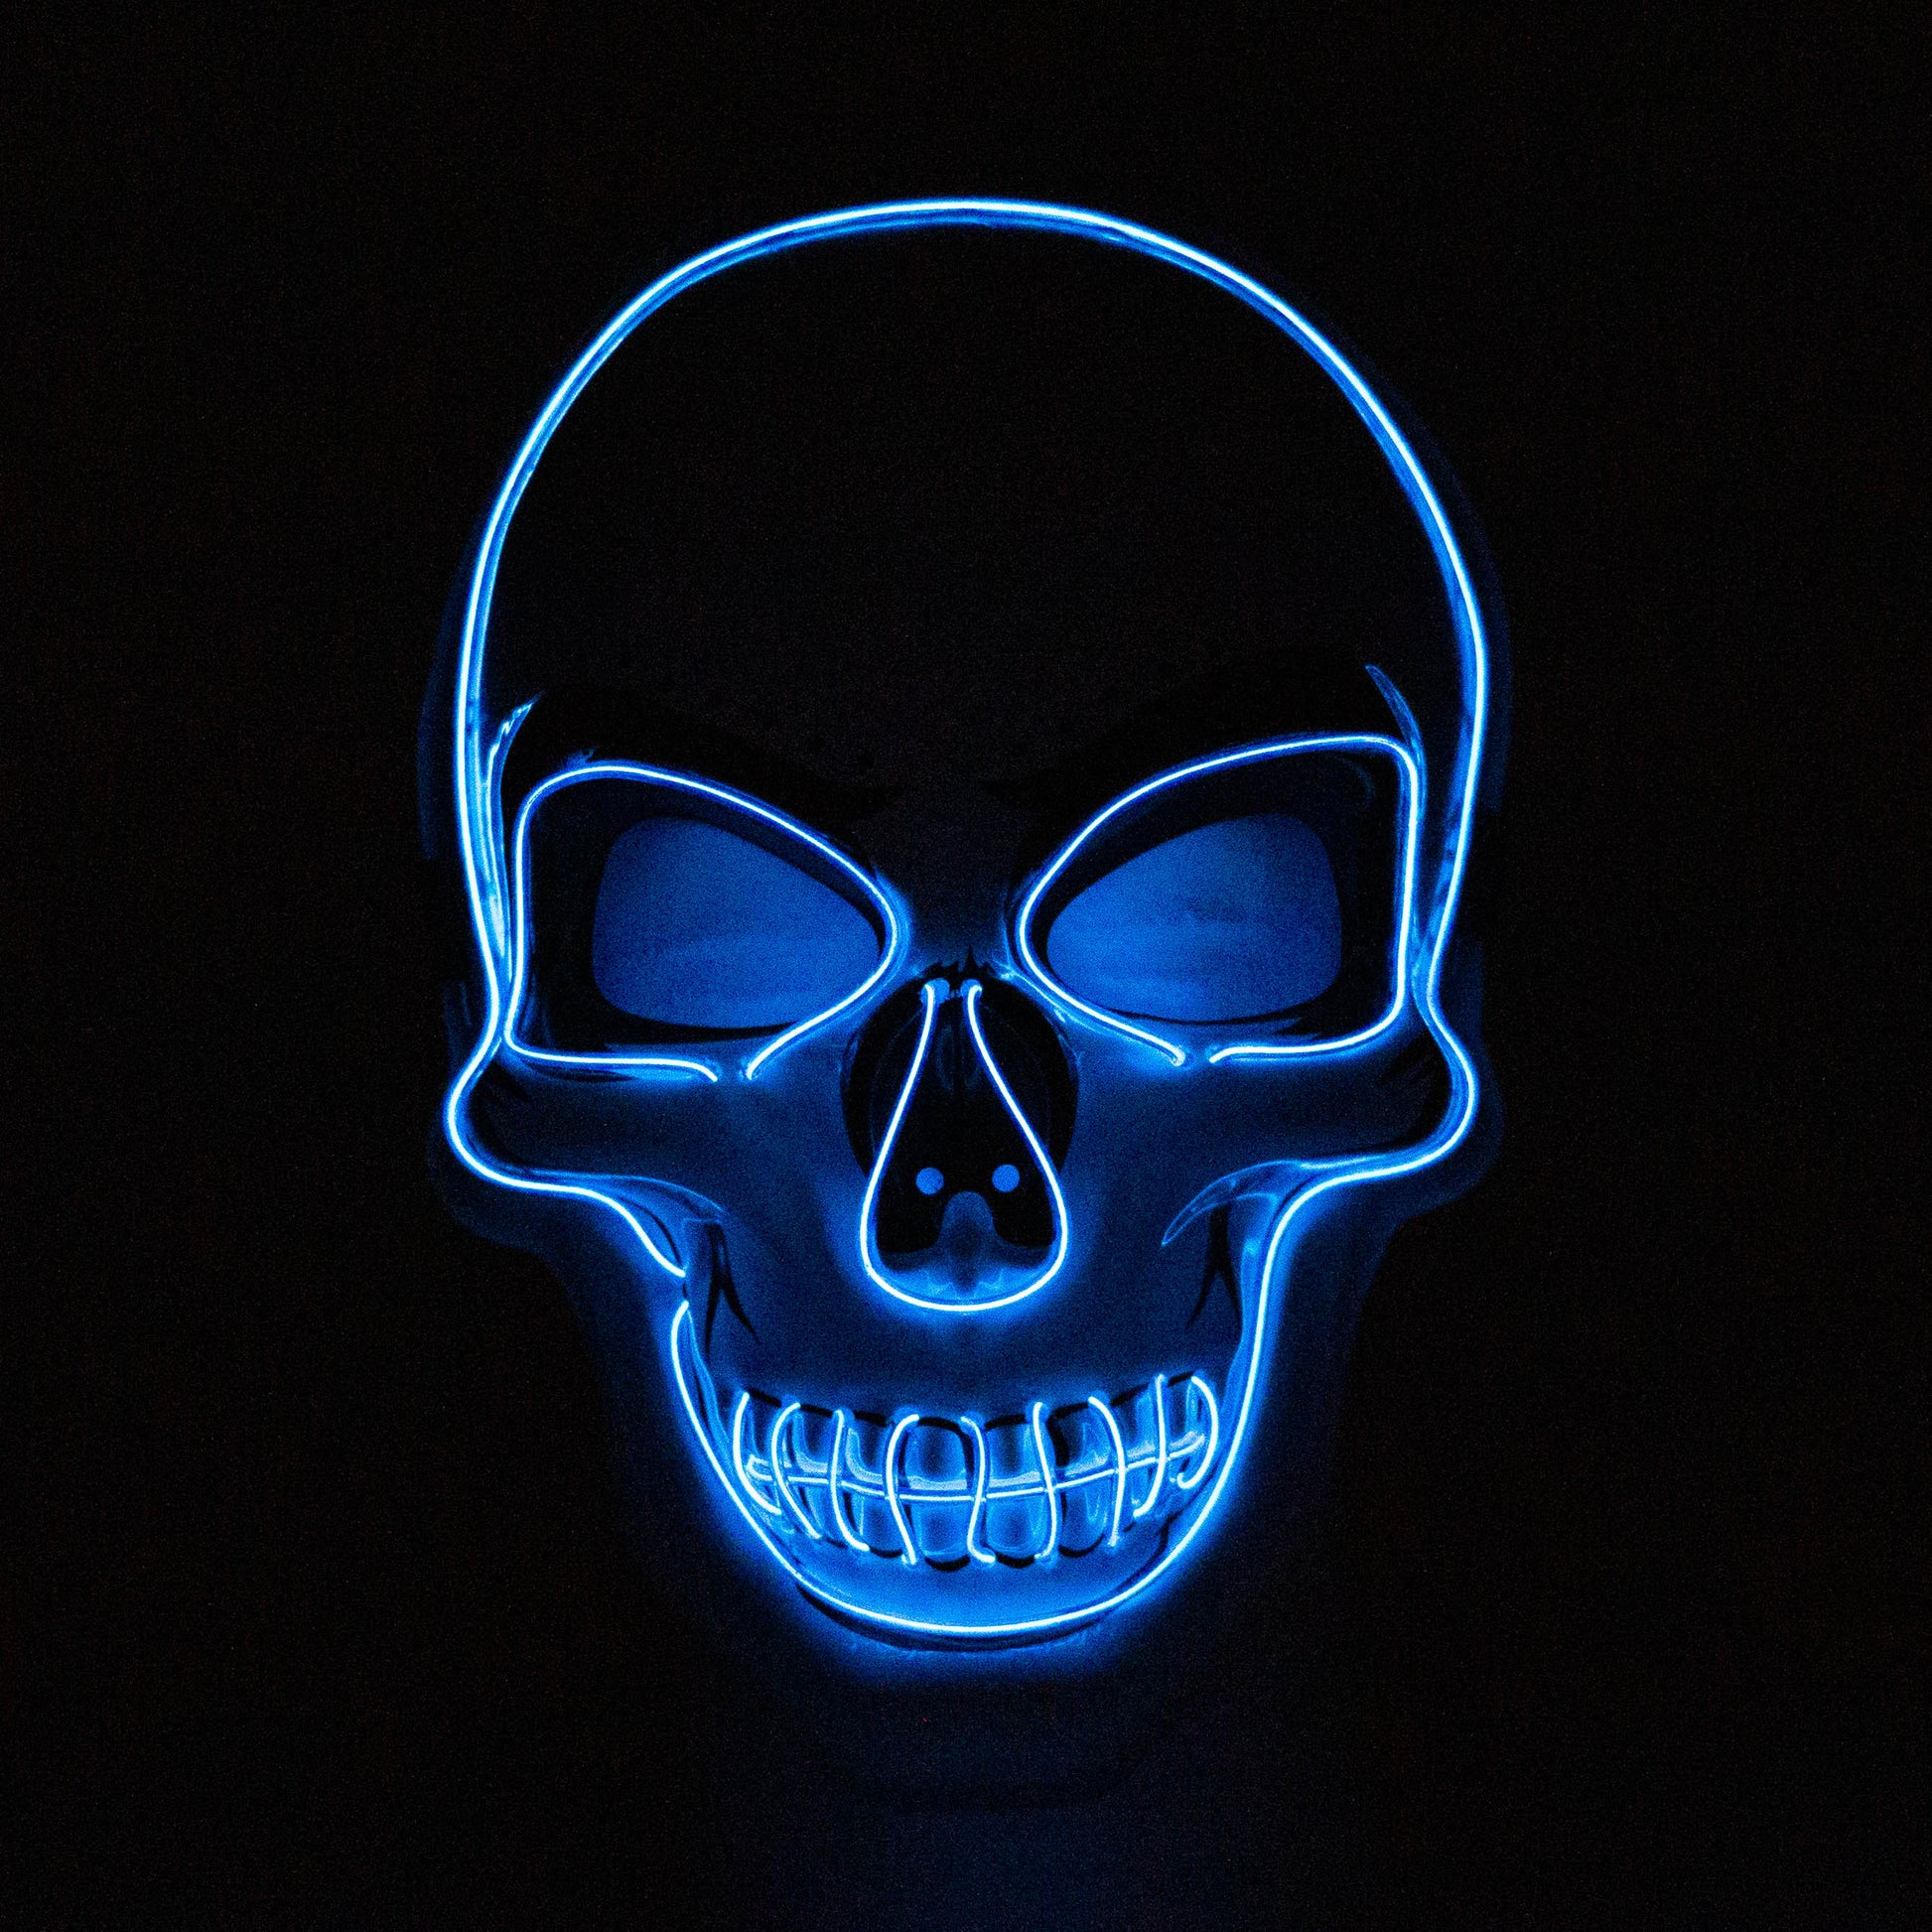 LED Neon Skull Mask for party or Halloween Costume_2